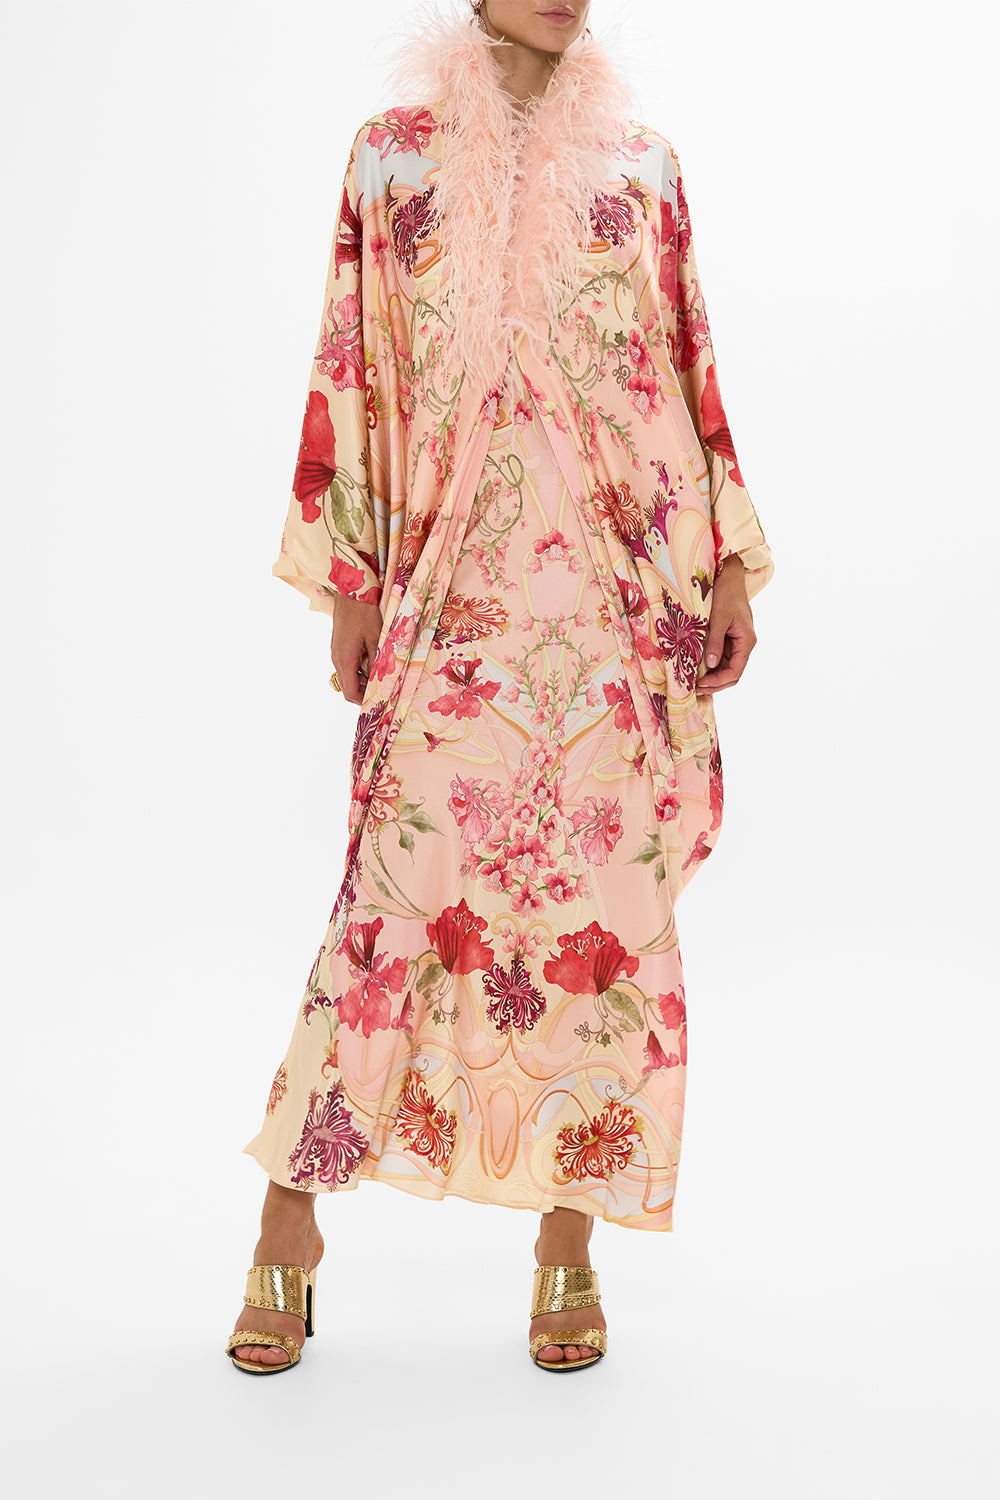 DRAPED BACK LAYER WITH FEATHER COLLAR BLOSSOMS AND BRUSHSTROKES